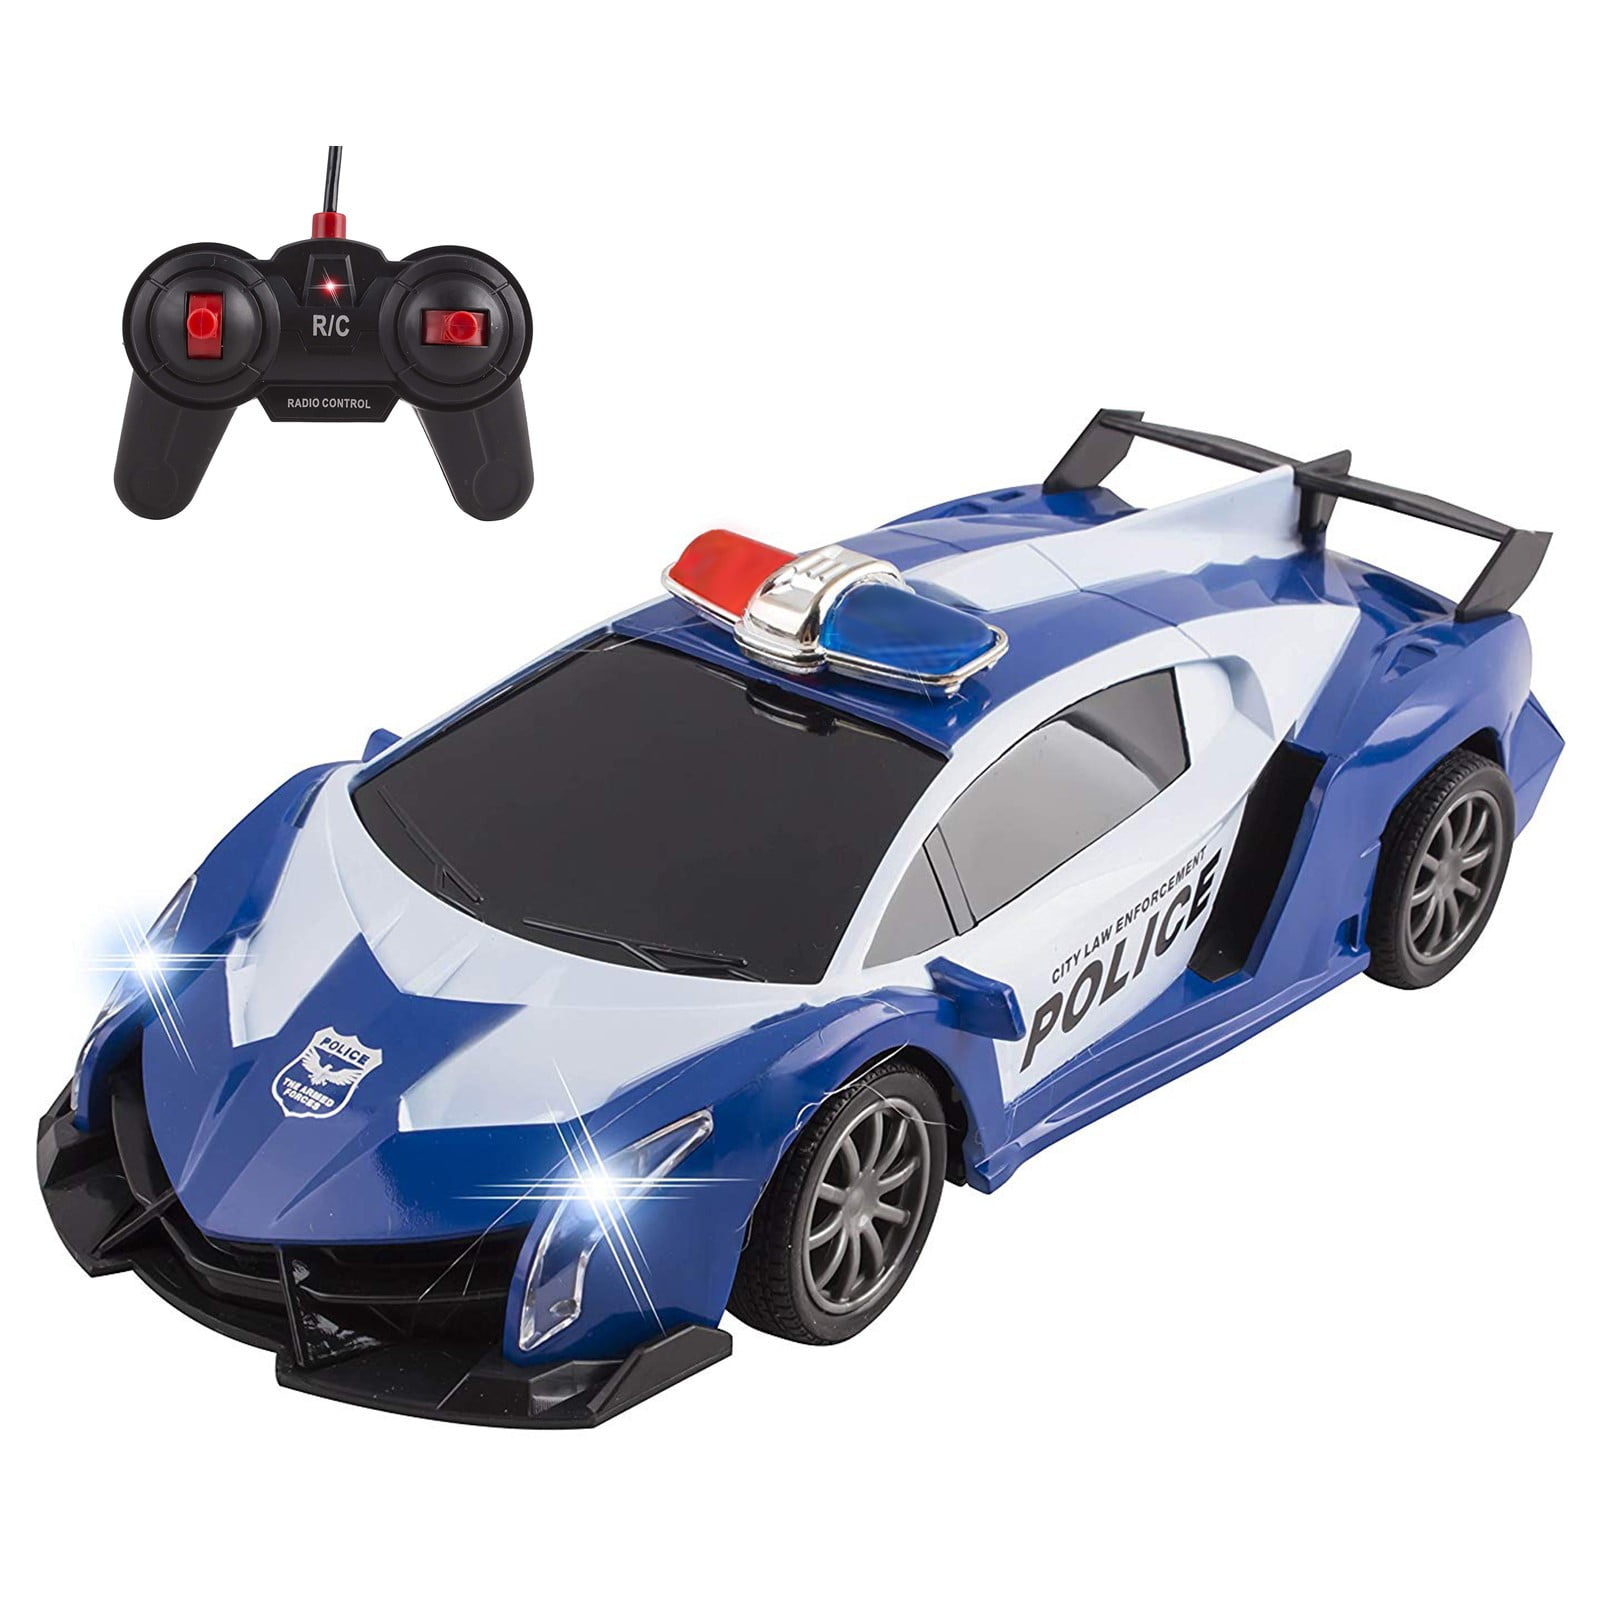 Magic Tracks Light-Up R/C Car & Remote "POLICE CAR" Realistic Sound Effects New 